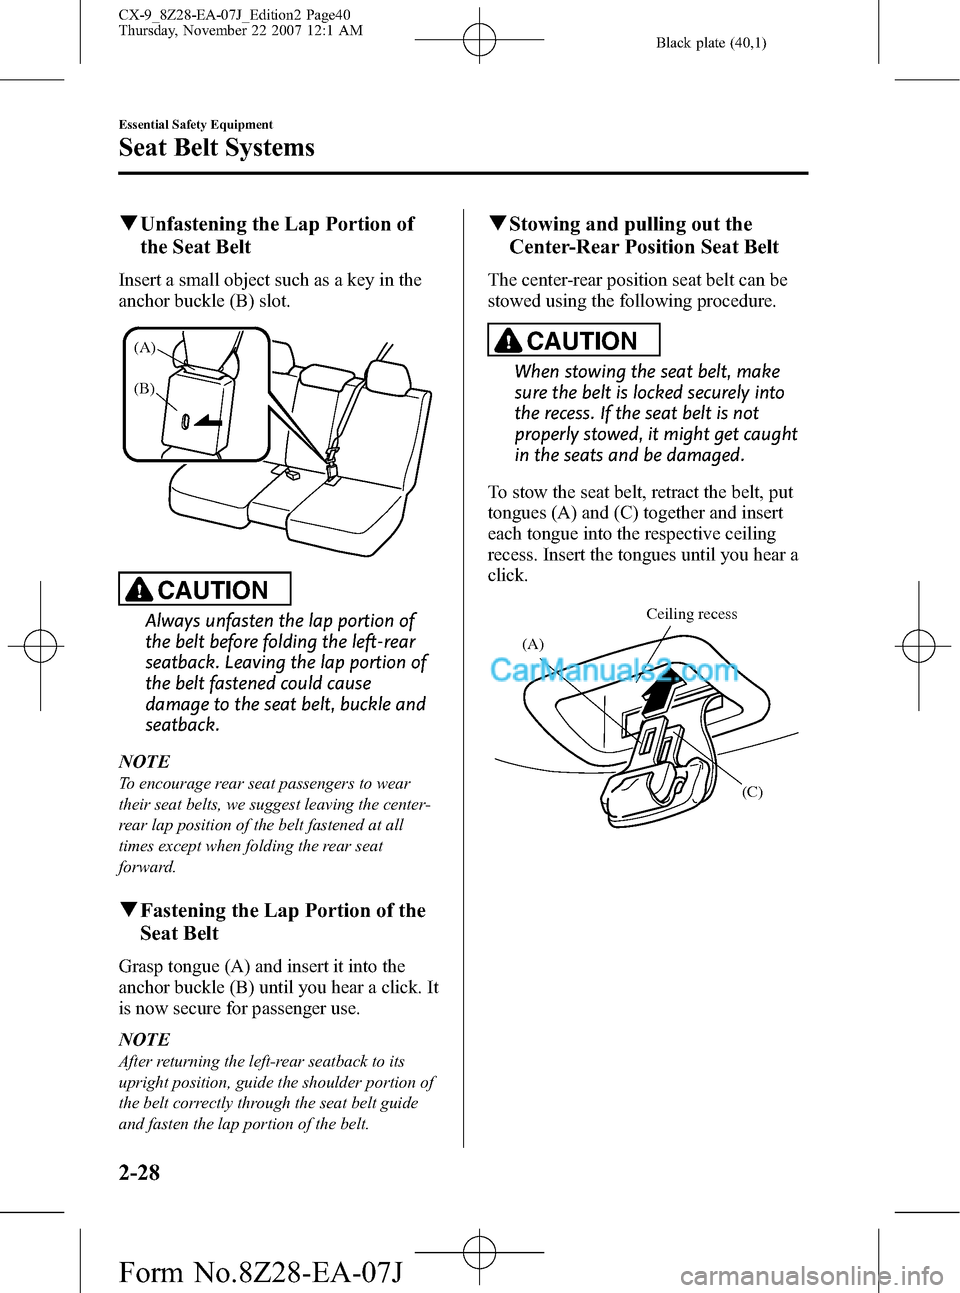 MAZDA MODEL CX-9 2008  Owners Manual (in English) Black plate (40,1)
qUnfastening the Lap Portion of
the Seat Belt
Insert a small object such as a key in the
anchor buckle (B) slot.
(A)
(B)
CAUTION
Always unfasten the lap portion of
the belt before f